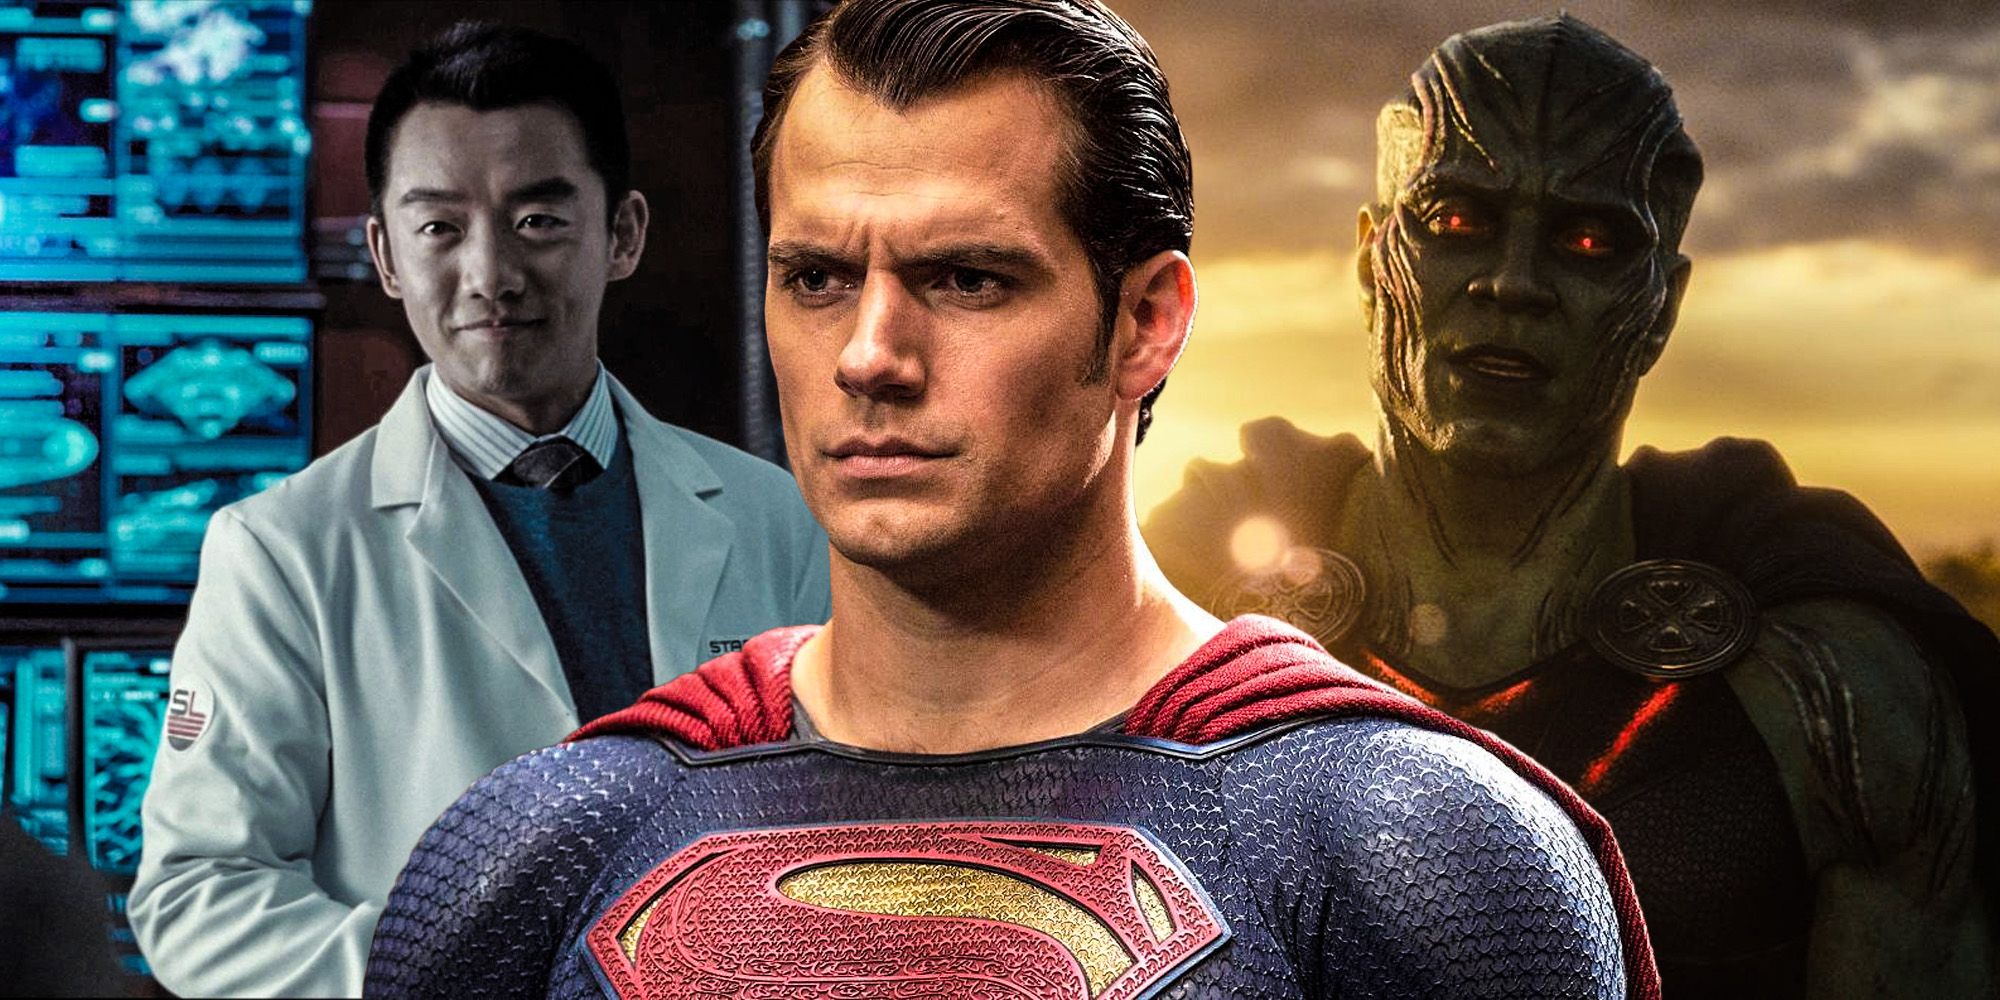 Blended image of Superman The atom Ryan Choi Martian Manhunter justice league members DCEU